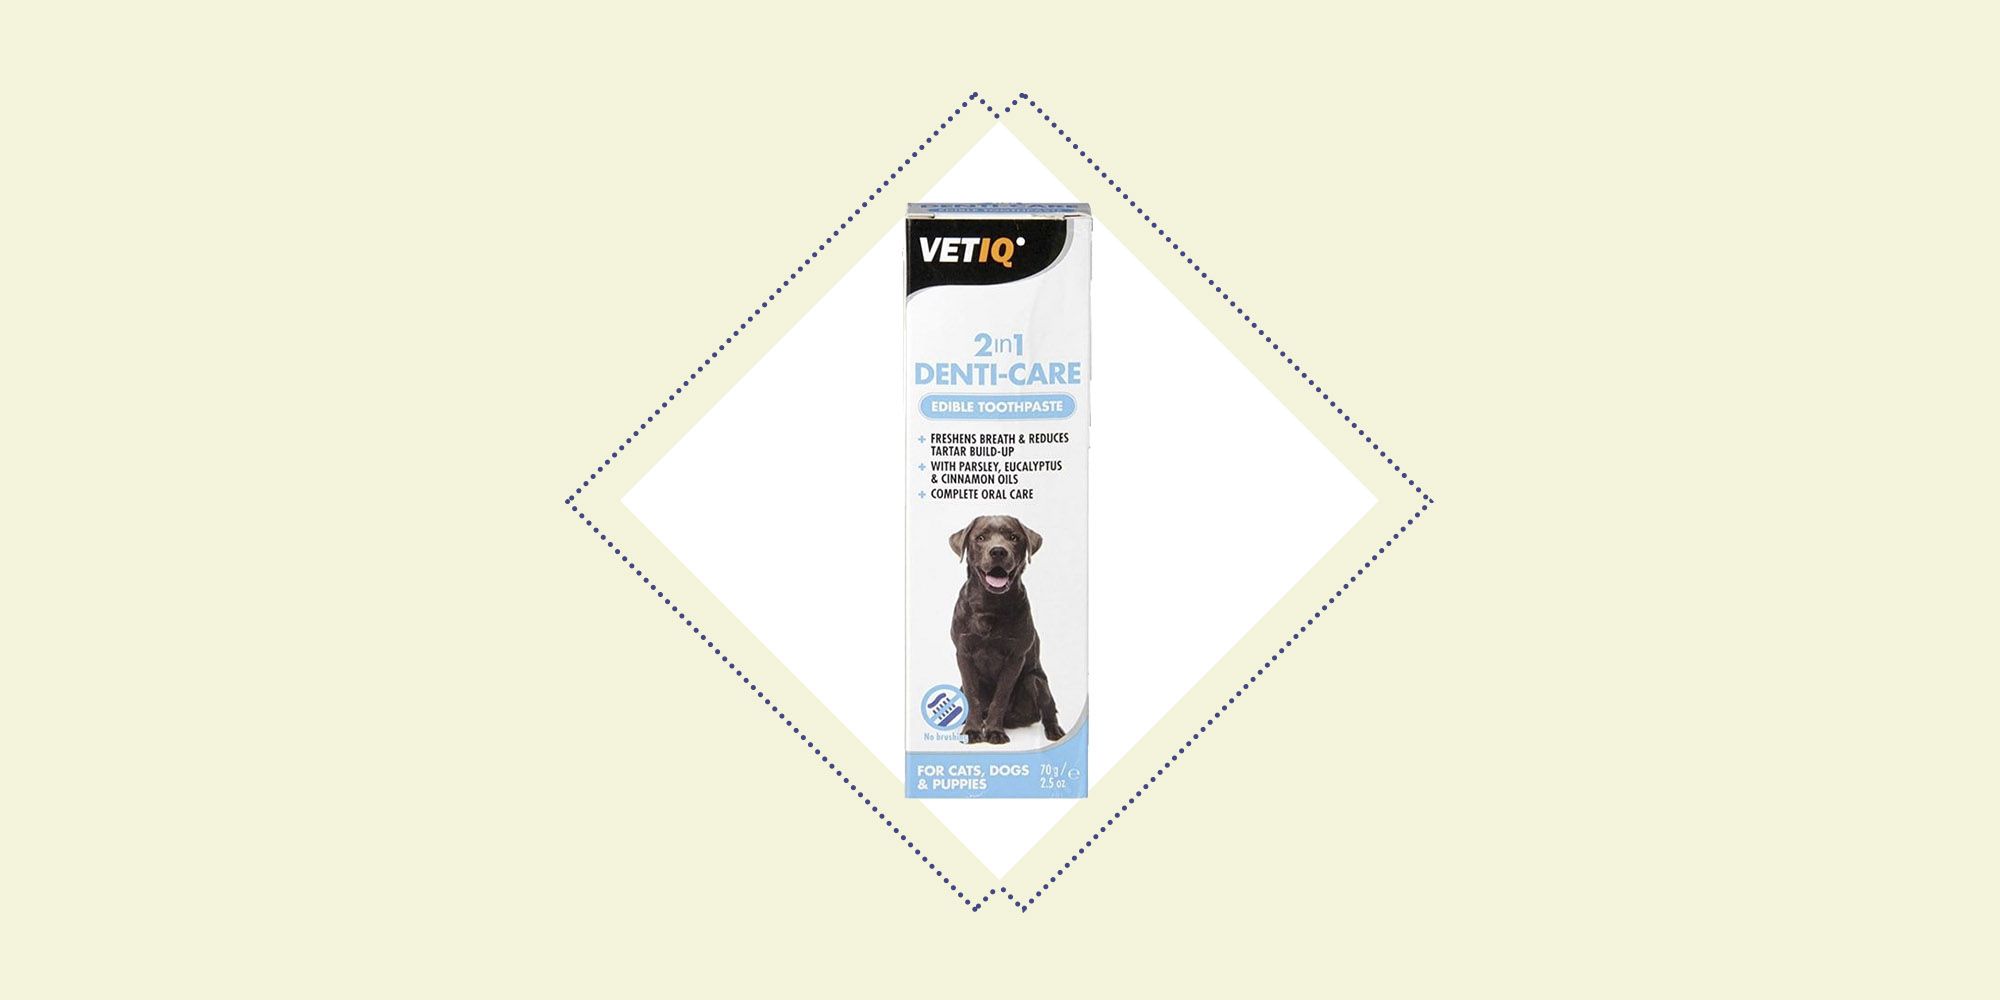 logic oral hygiene gel for dogs & cats